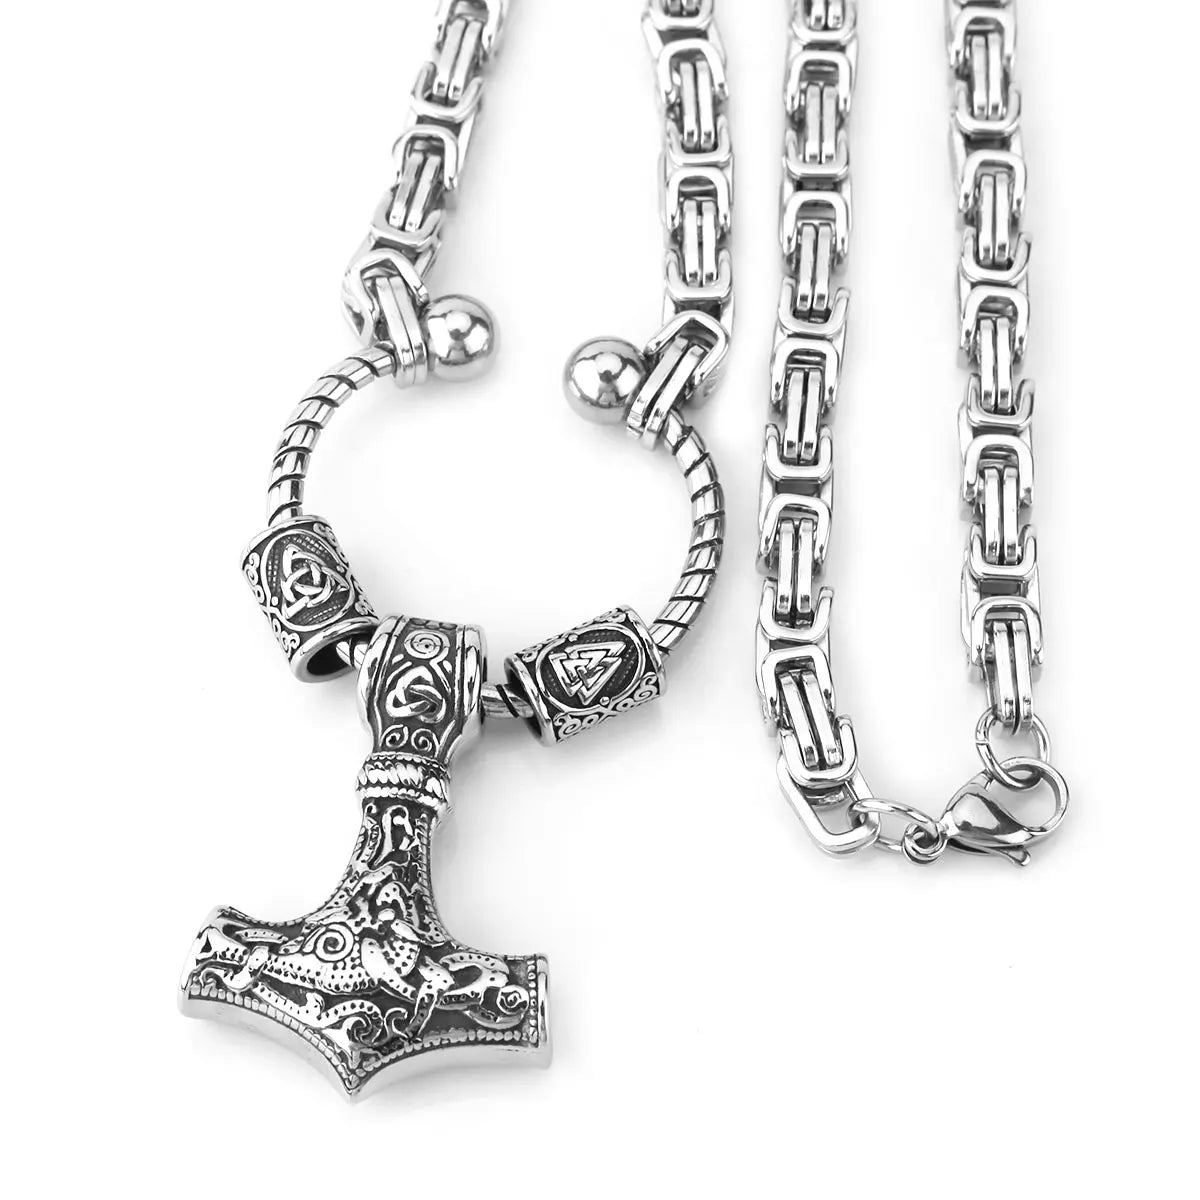 FZ Stainless Steel Thor's Hammer Nordic Viking Necklace DSers